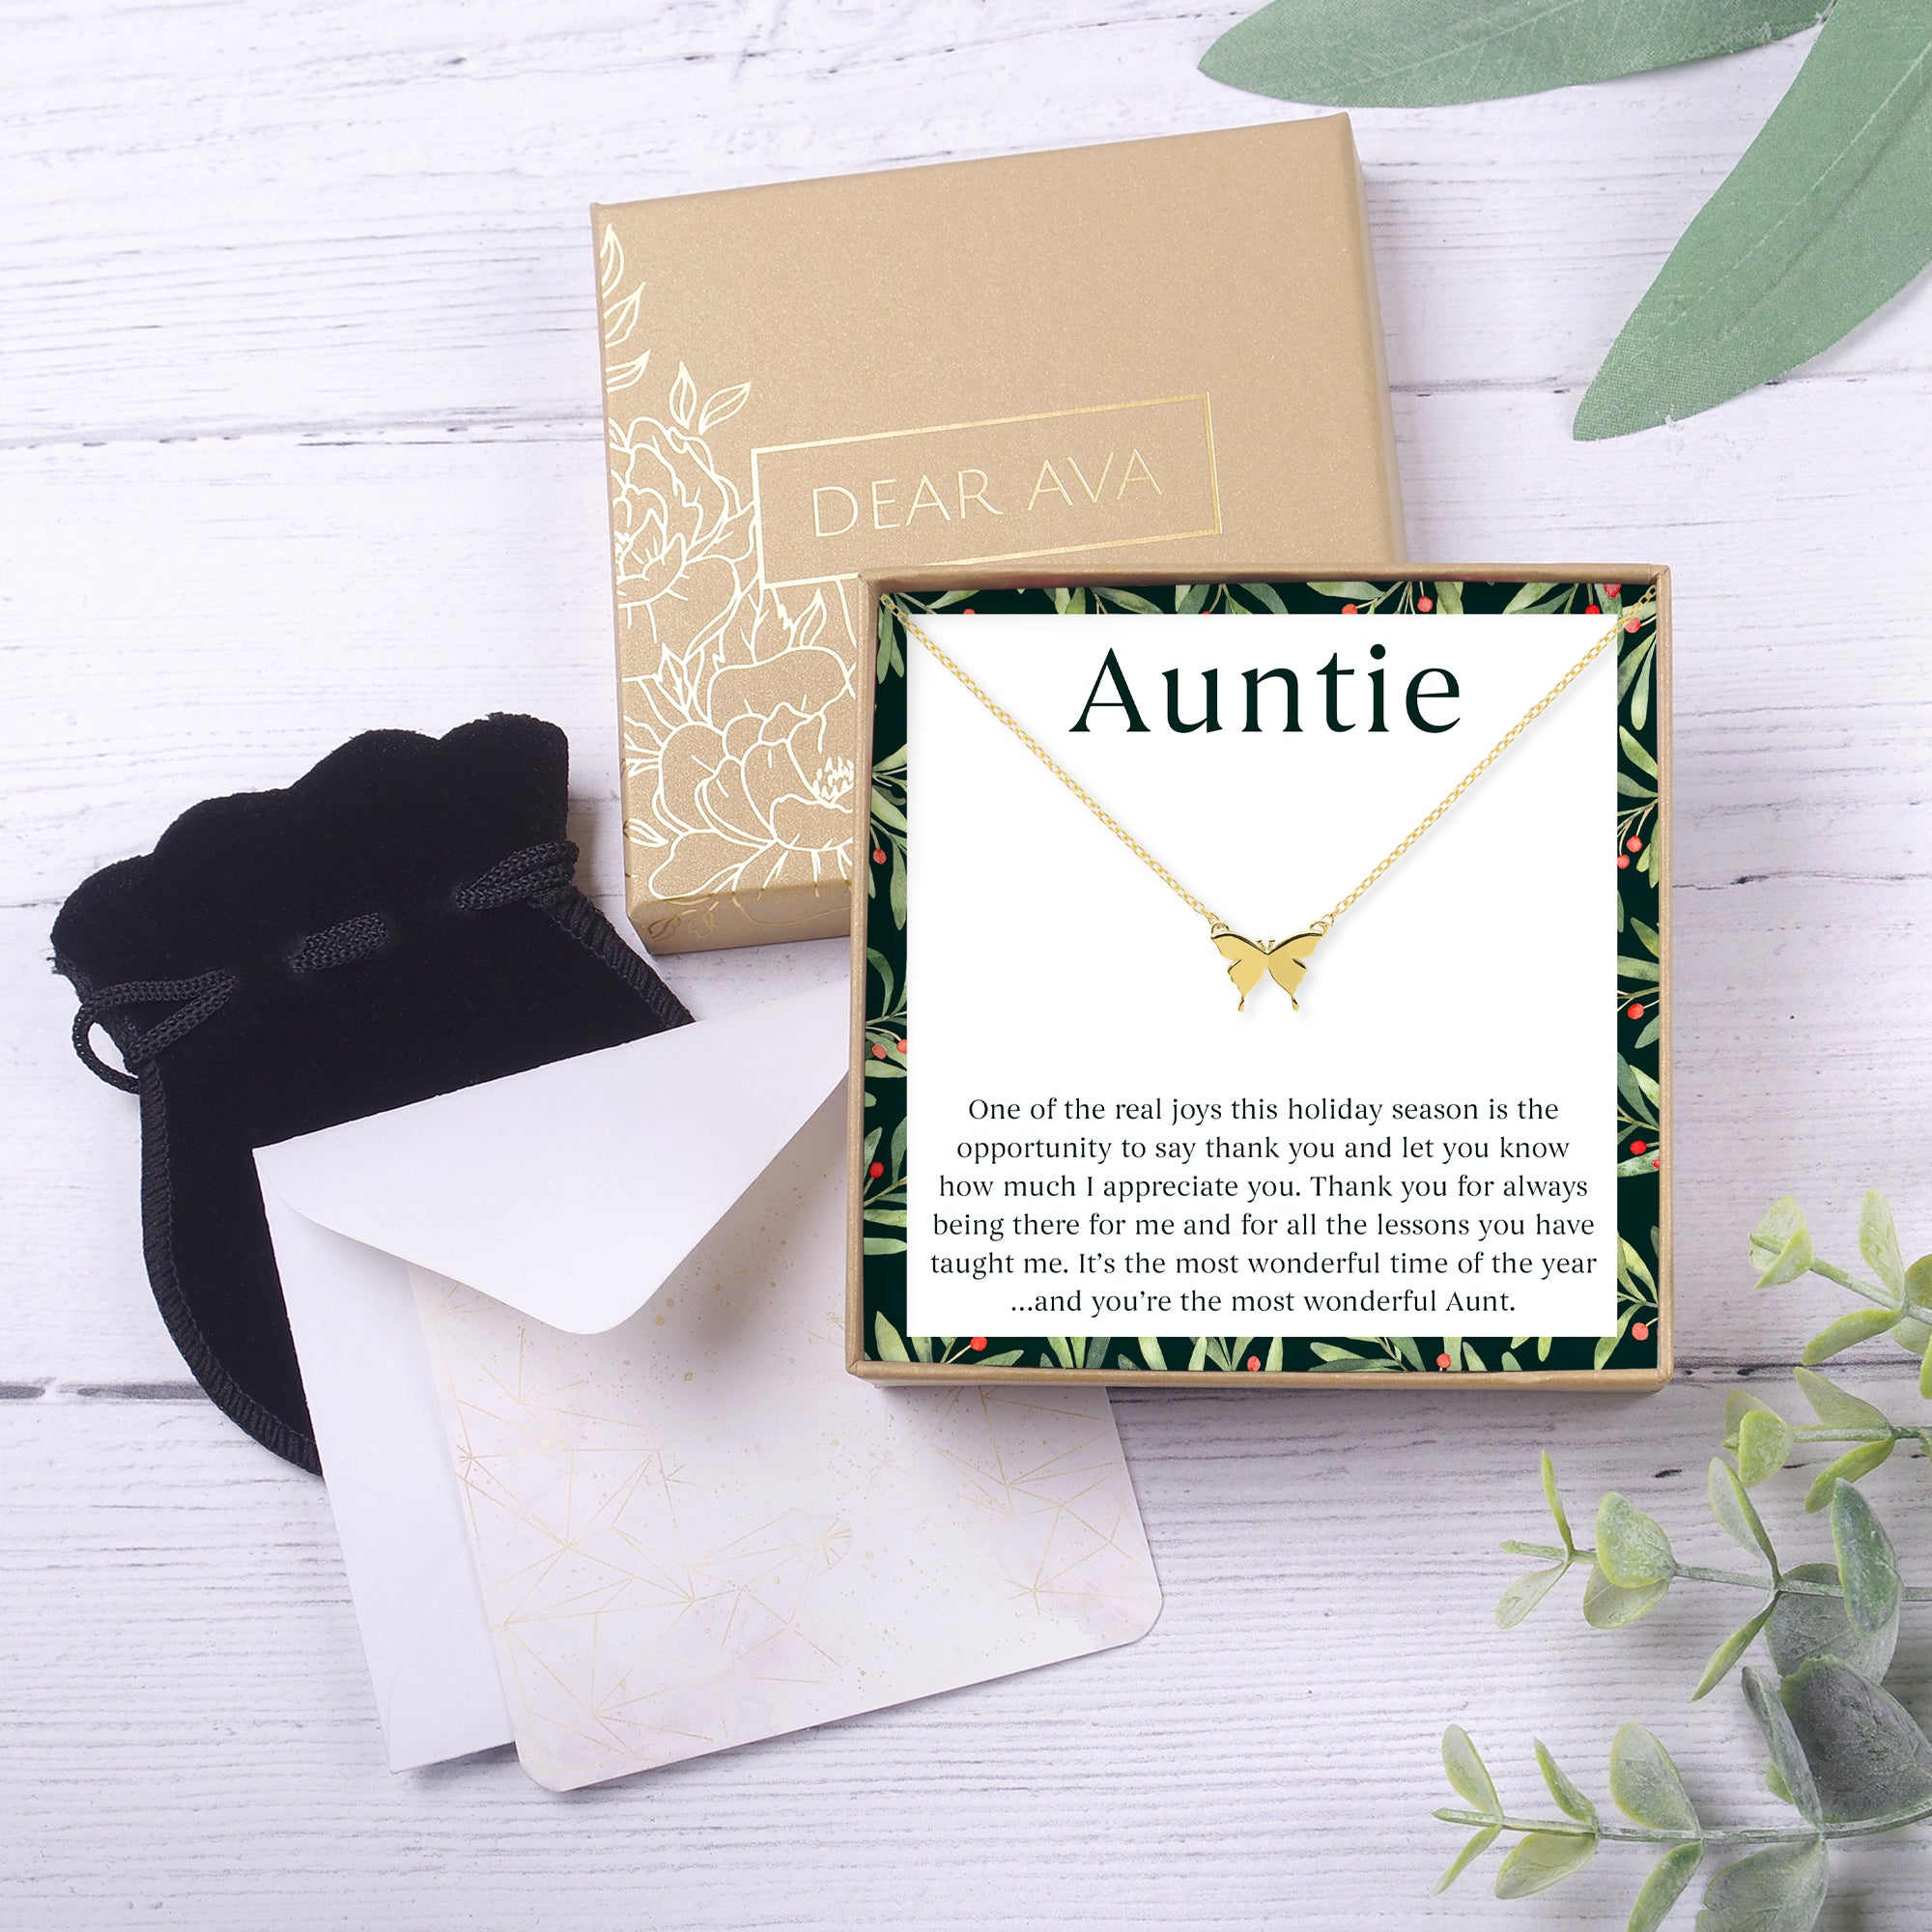 Christmas Gift for Aunt: Present, Necklace Jewelry, Xmas Holiday Gift Idea, Auntie, Aunt Gift, Aunt Jewelry, Best Aunt, Multiple Necklace Styles, Tree